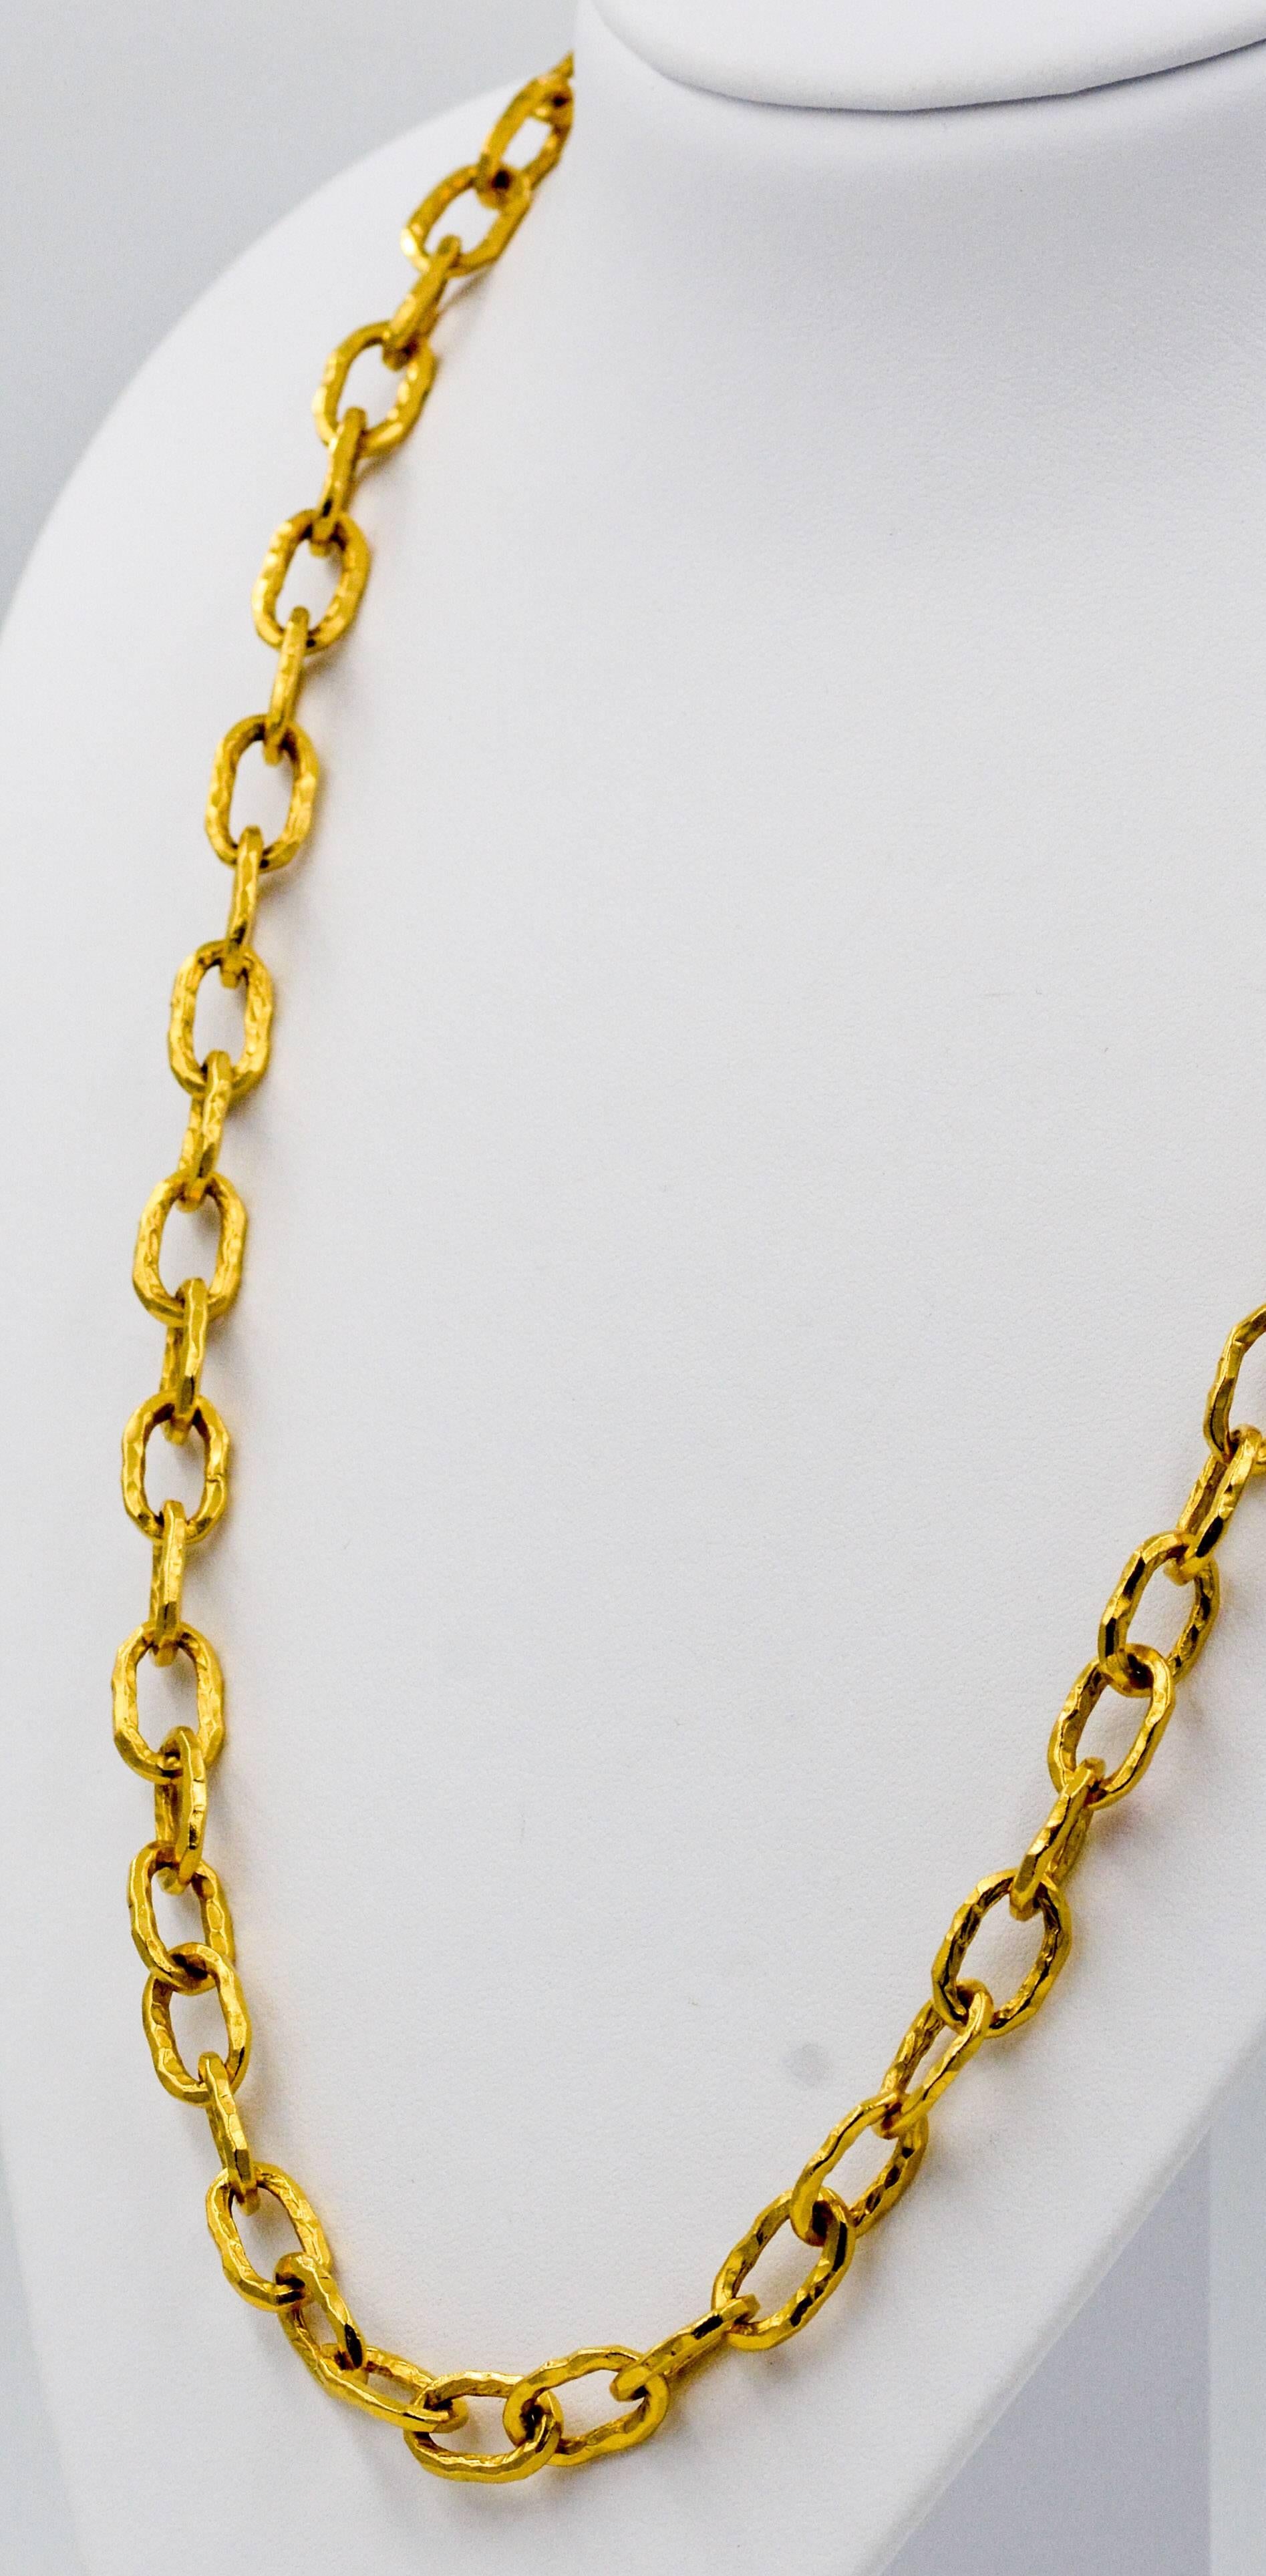 This amazing Jean Mahie medium cadene necklaced is artfully crafted using 22K yellow gold and measures 32 inches long.  Jean Mahie finished the medium cadene necklace in her signature style of rich primitive hammer finished oval links.  The links